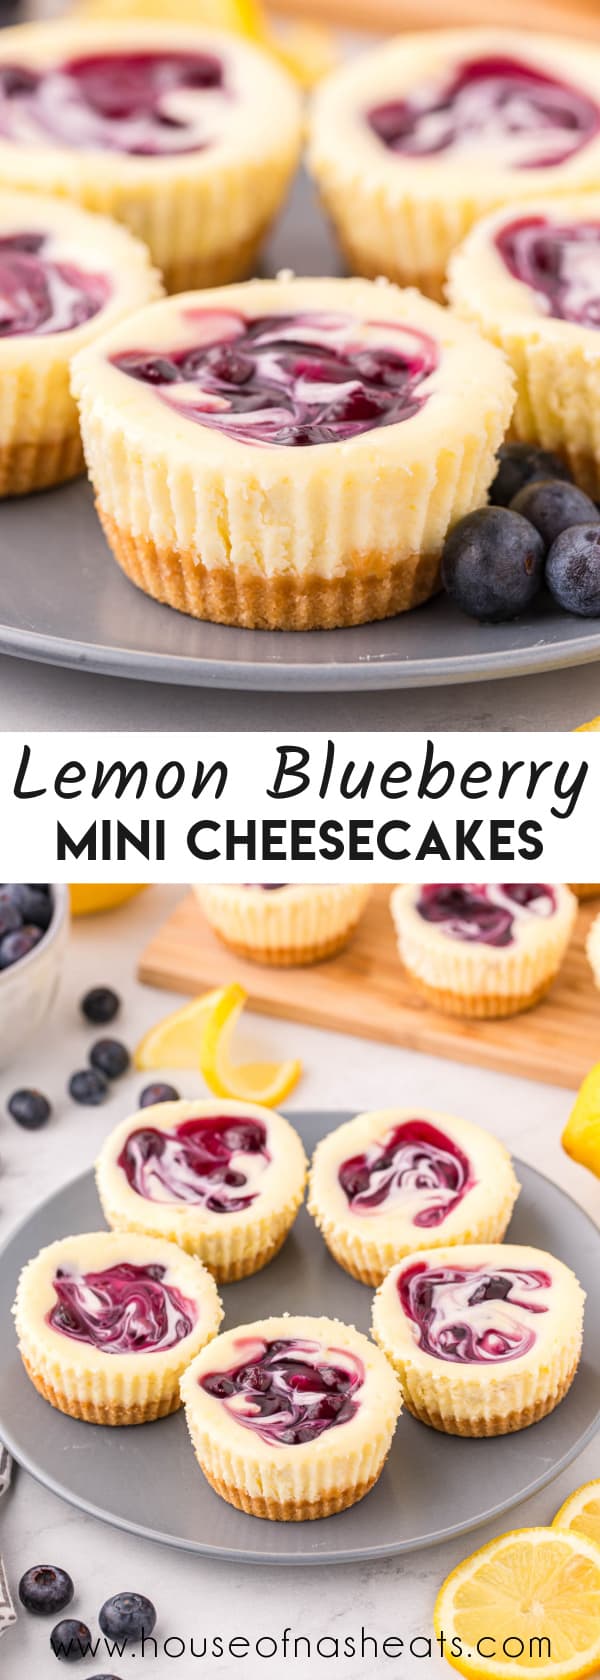 A collage of images of mini lemon blueberry cheesecakes with text overlay.